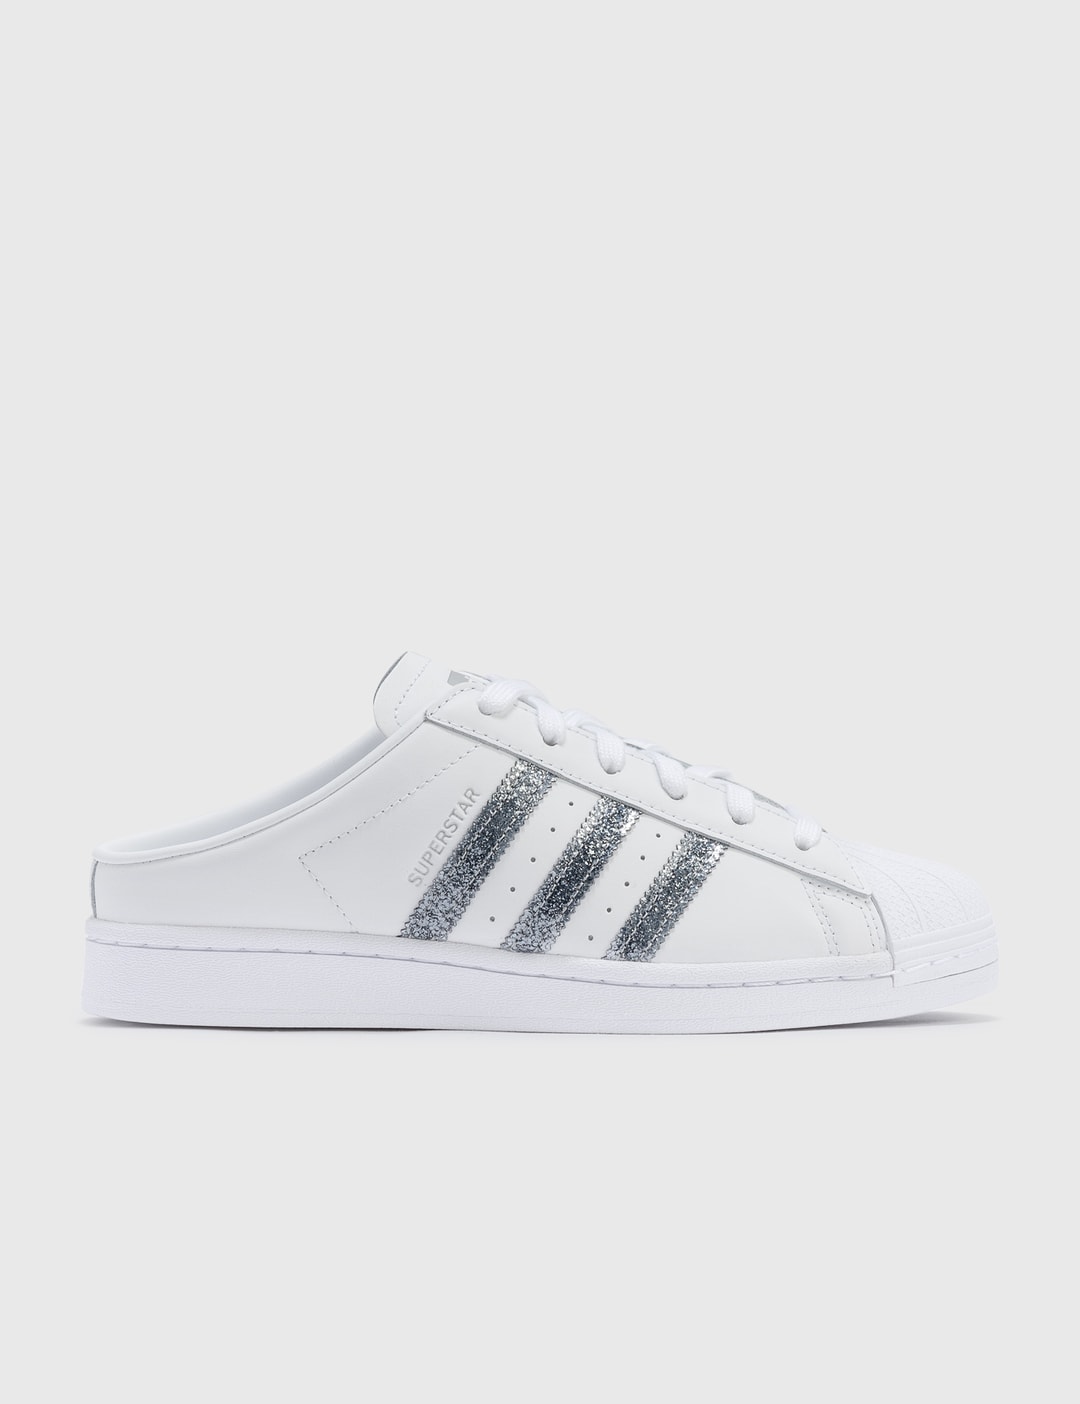 Adidas Originals - Superstar HBX - Globally Curated Fashion and Lifestyle by